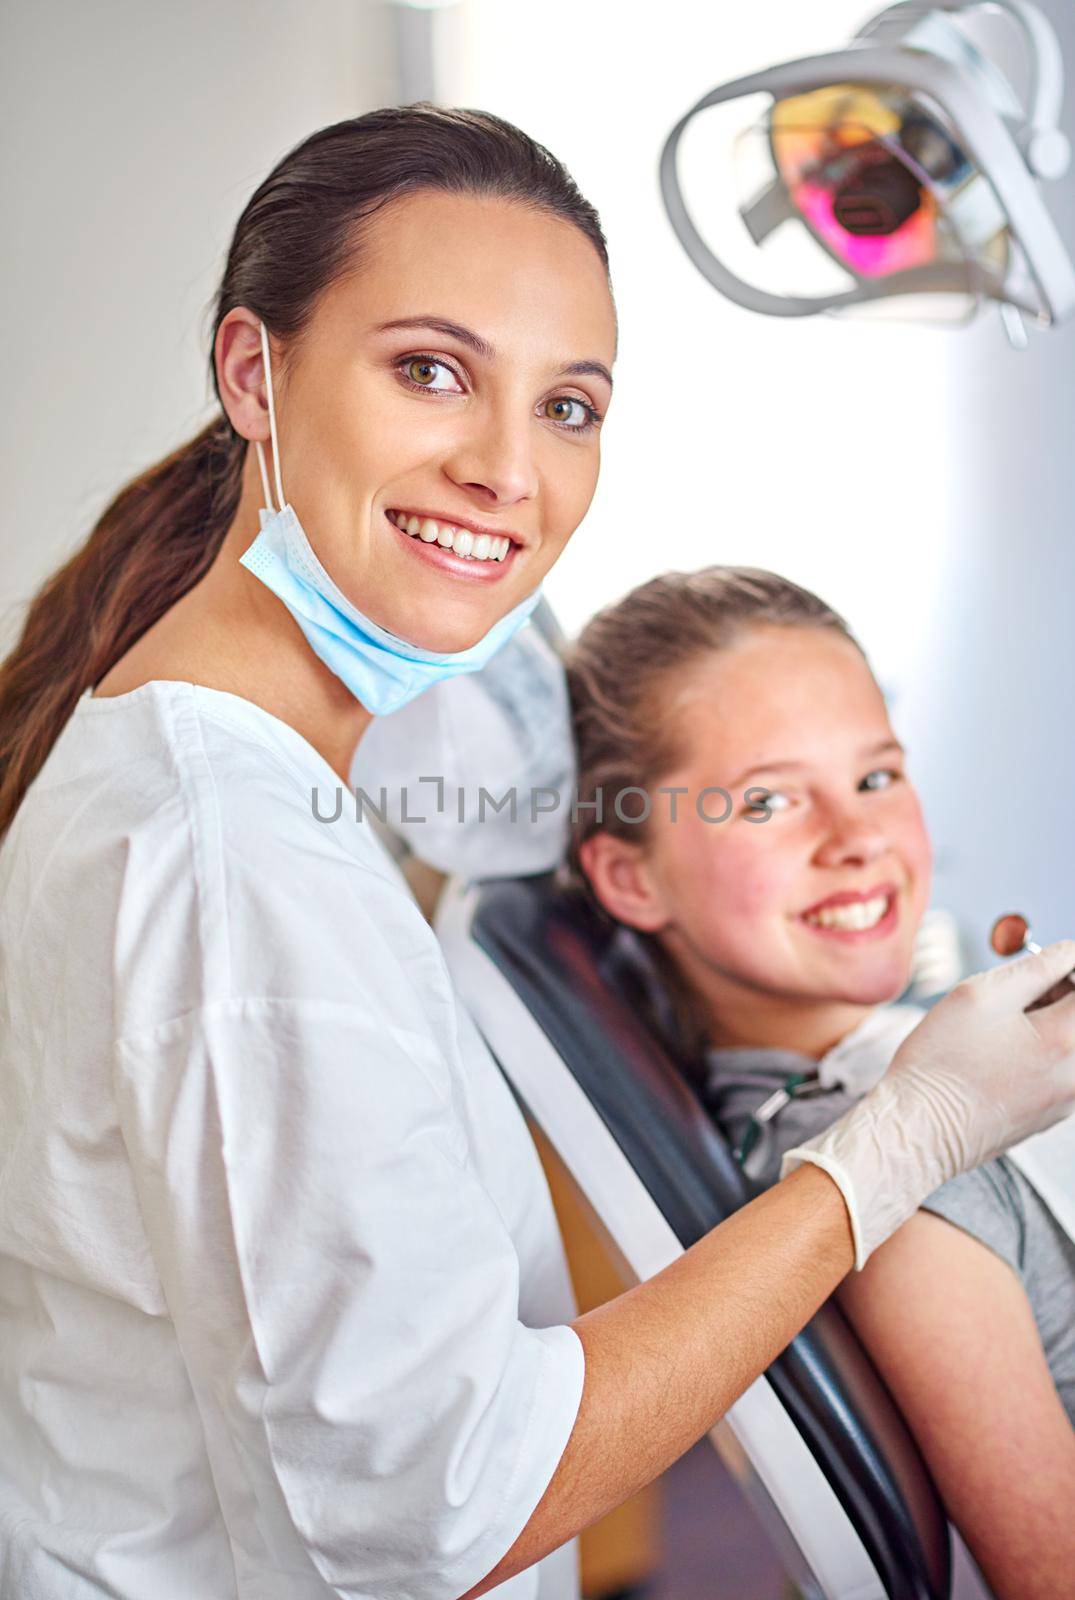 Always professional. Portrait of an attractive female dentist and her child patient